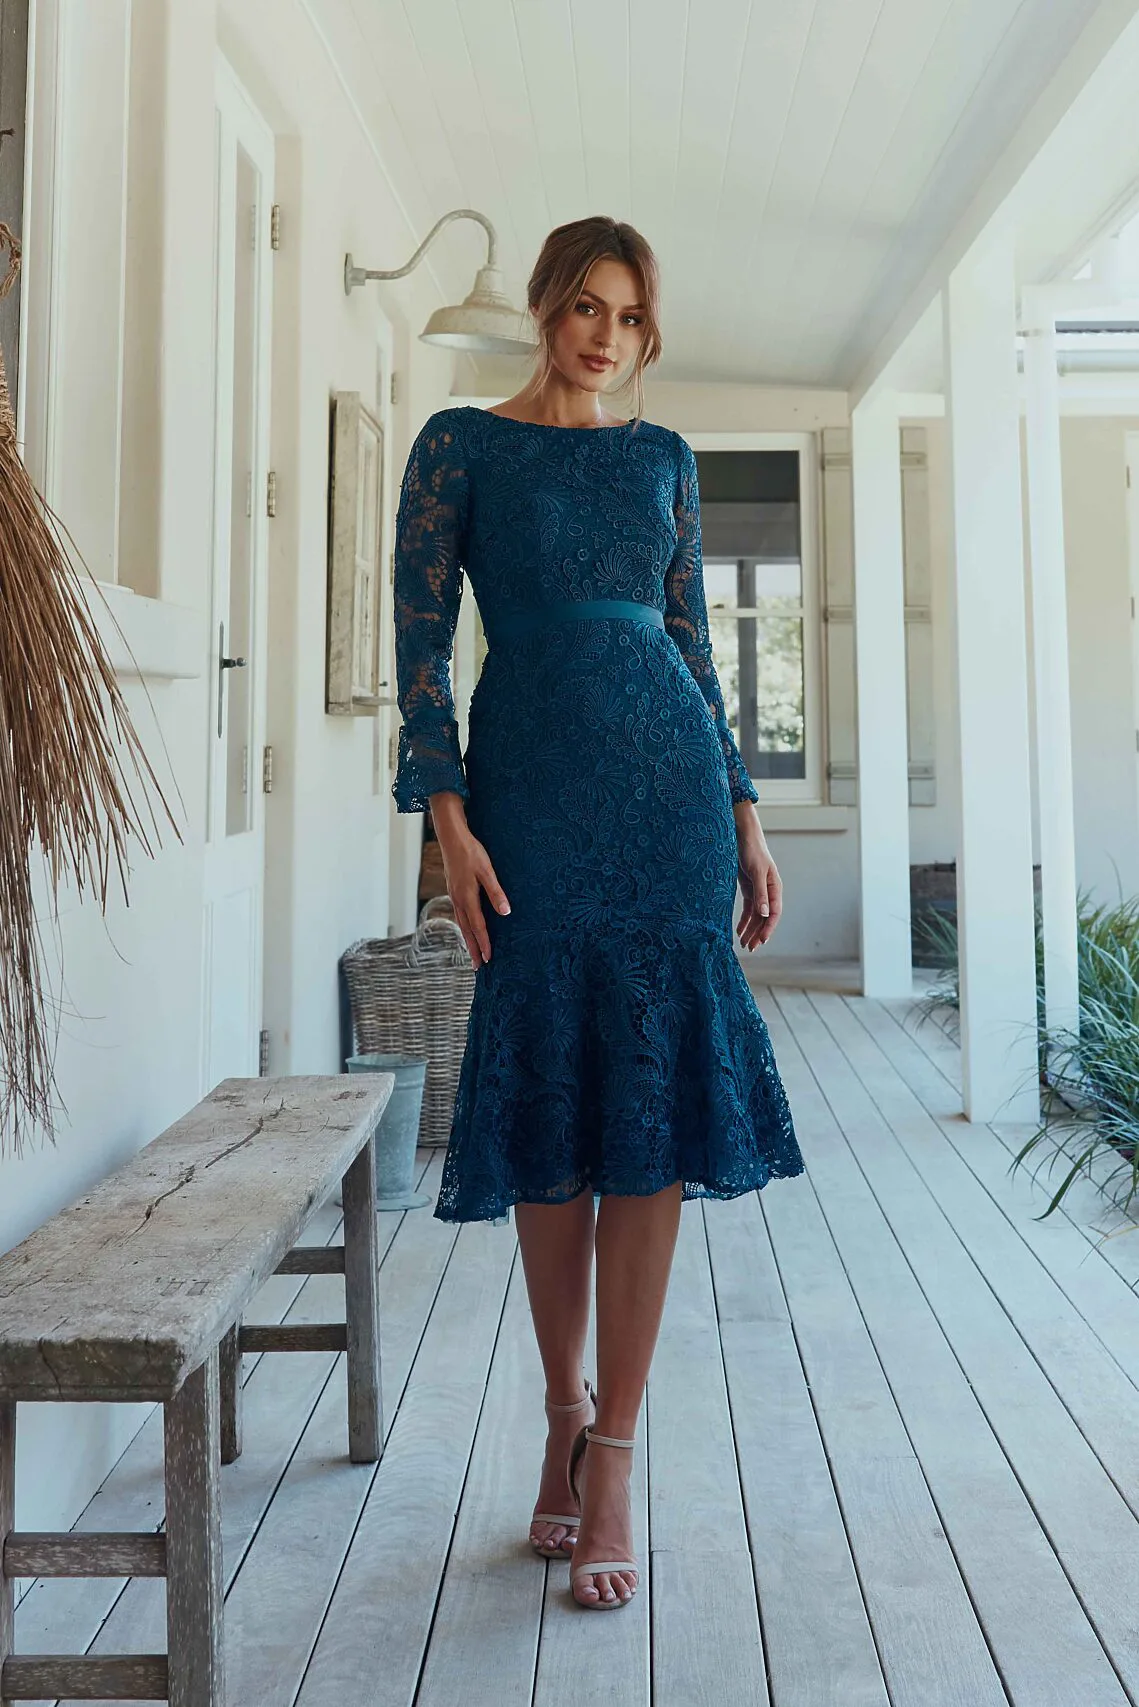 Tania Olsen Phaedra MO2352 guipure lace mid length long sleeve dress with flared hem in navy, front view